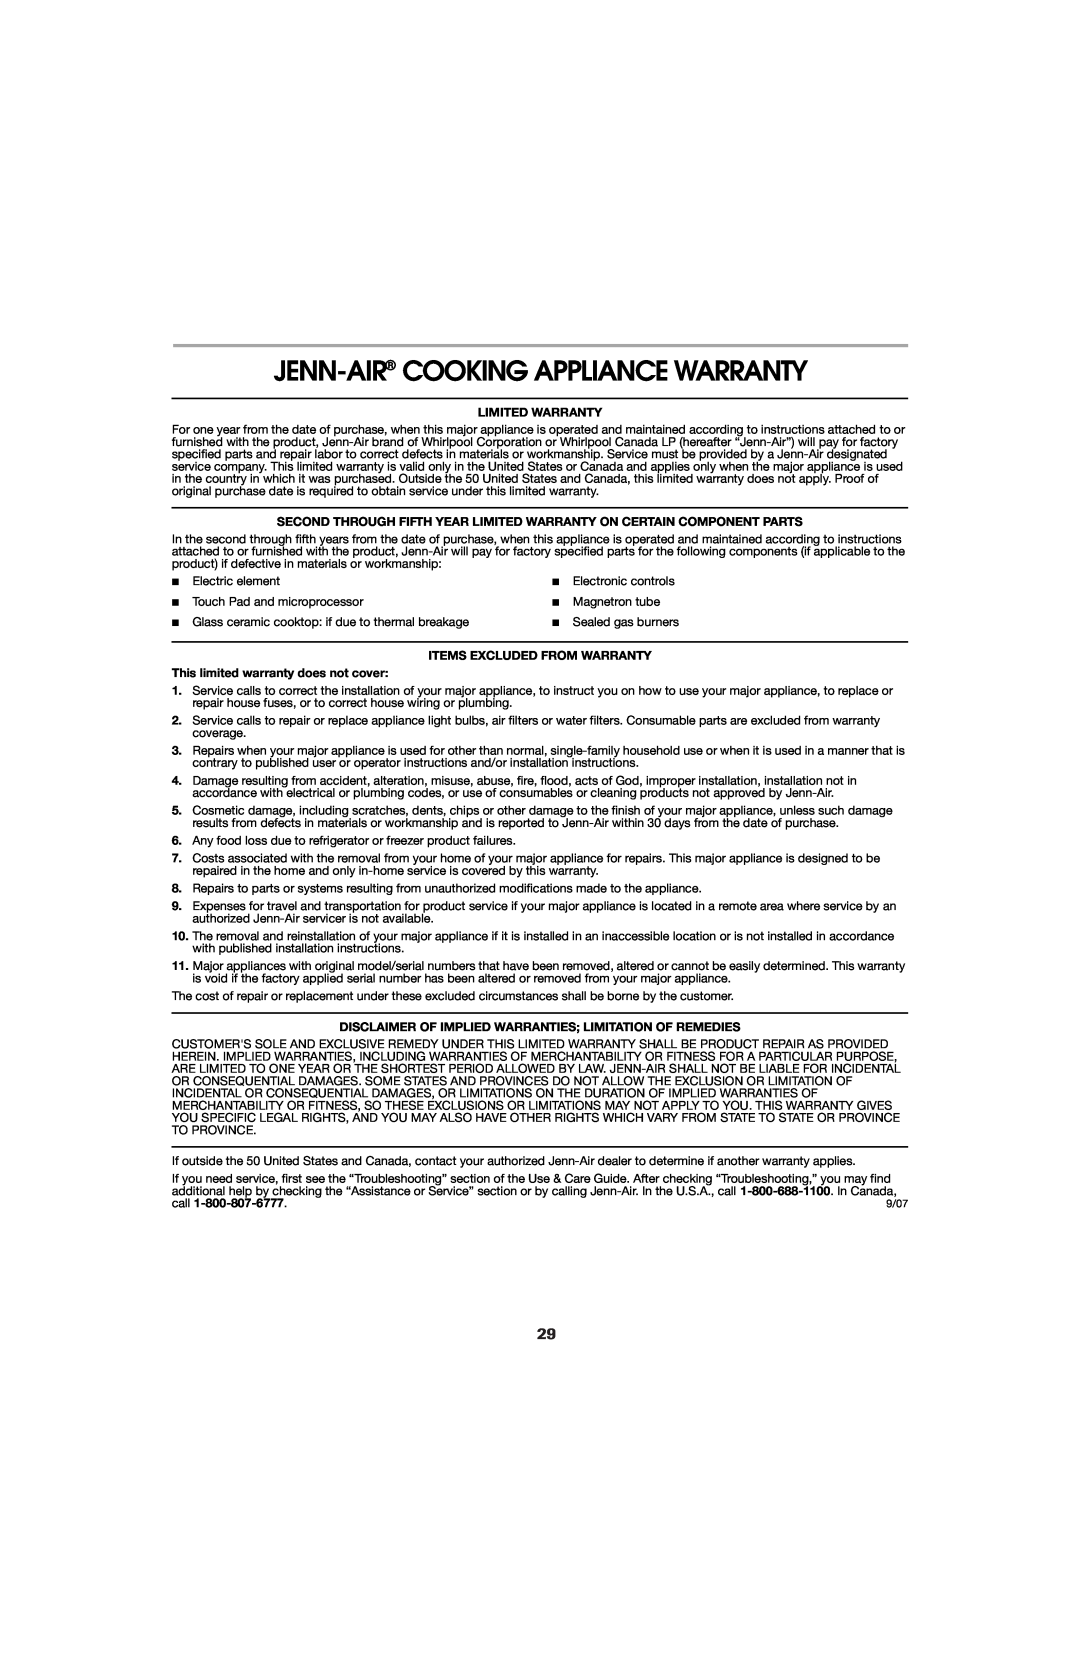 Jenn-Air 8113P759-60 Jenn-Air Cooking Appliance Warranty, Limited Warranty, Items Excluded From Warranty, call 